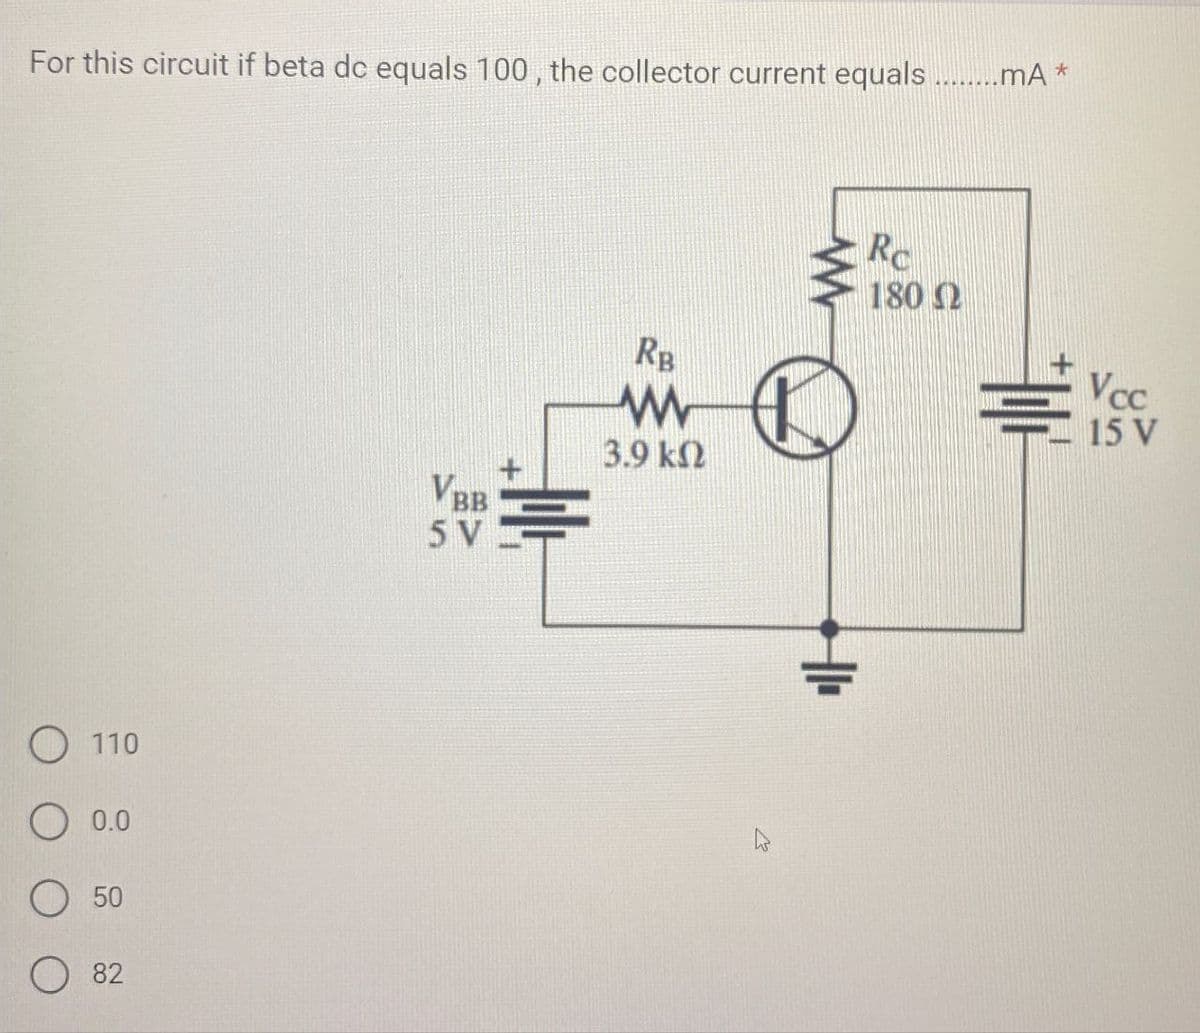 For this circuit if beta dc equals 100, the collector current equals ........mA *
110
○ 0.0
50
82
VBB
5 V
RB
w
3.9 ΚΩ
Re
180 Ω
Vcc
TOP
15 V